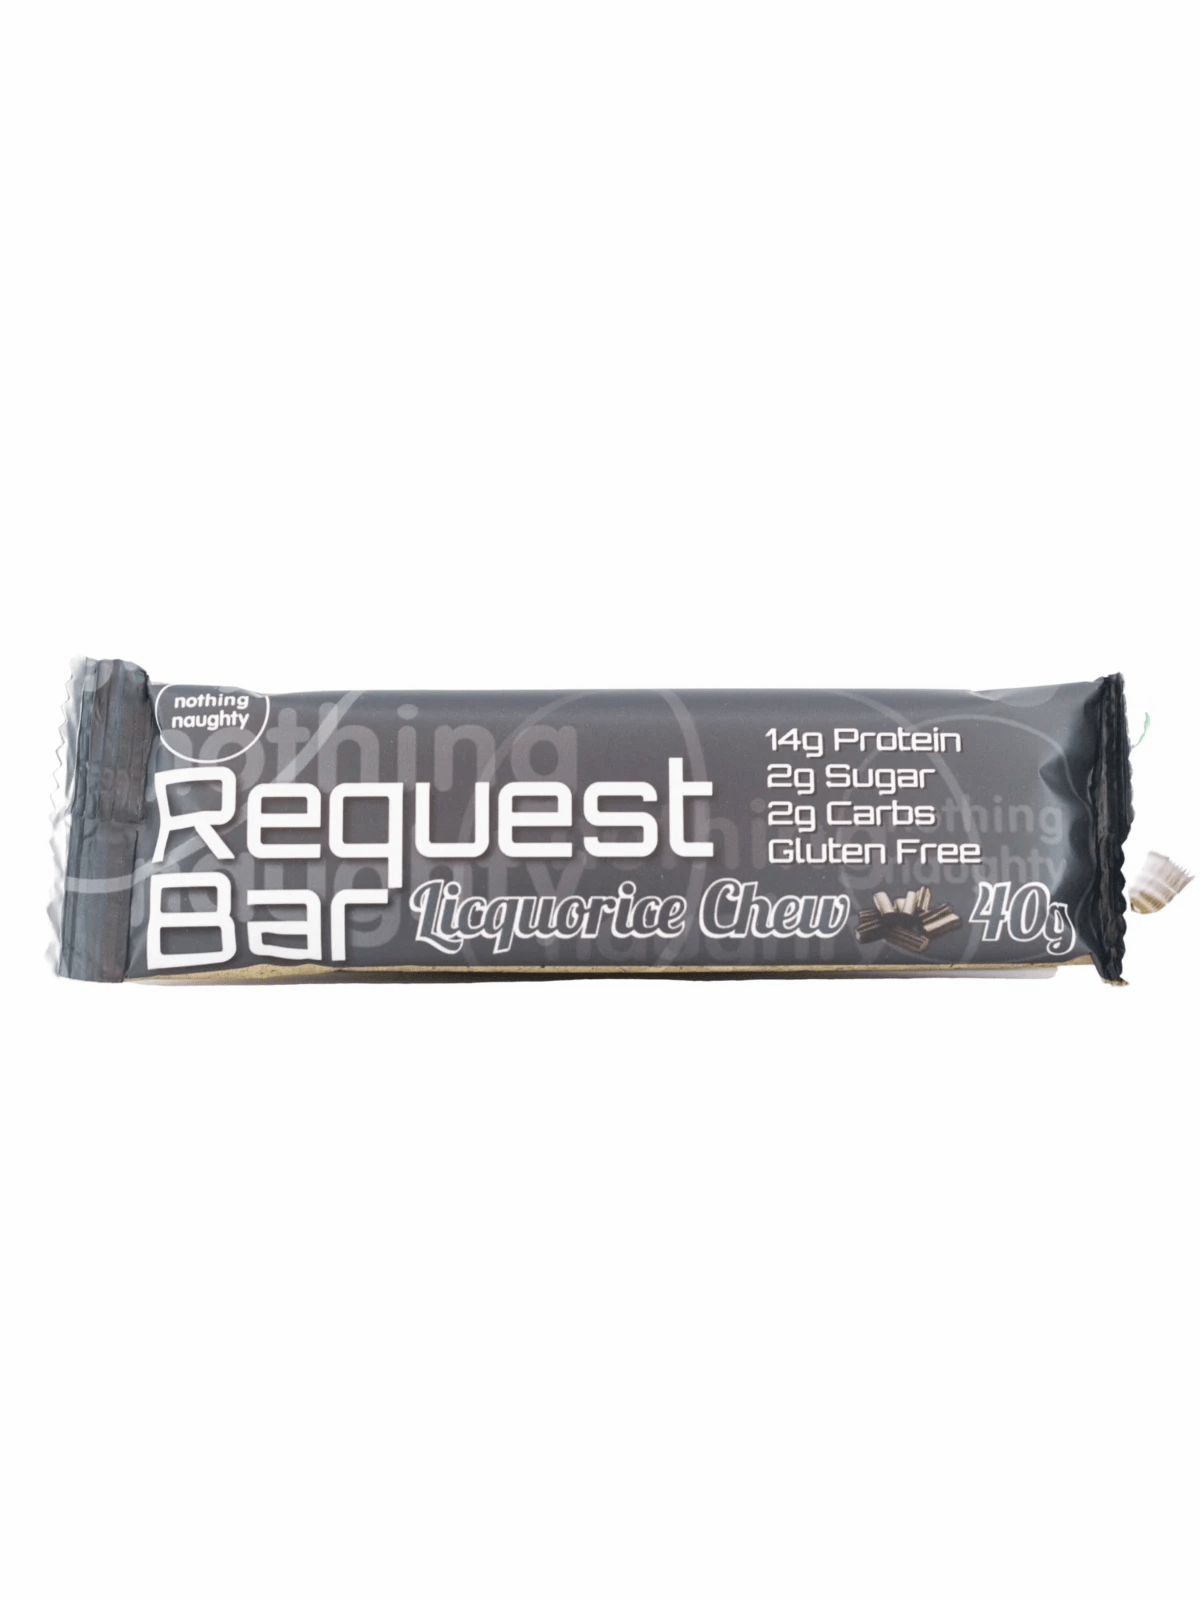 Nothing Naughty Request Liqourice Chew Bar - Tramping Food and Accessories sold by Venture Outdoors NZ